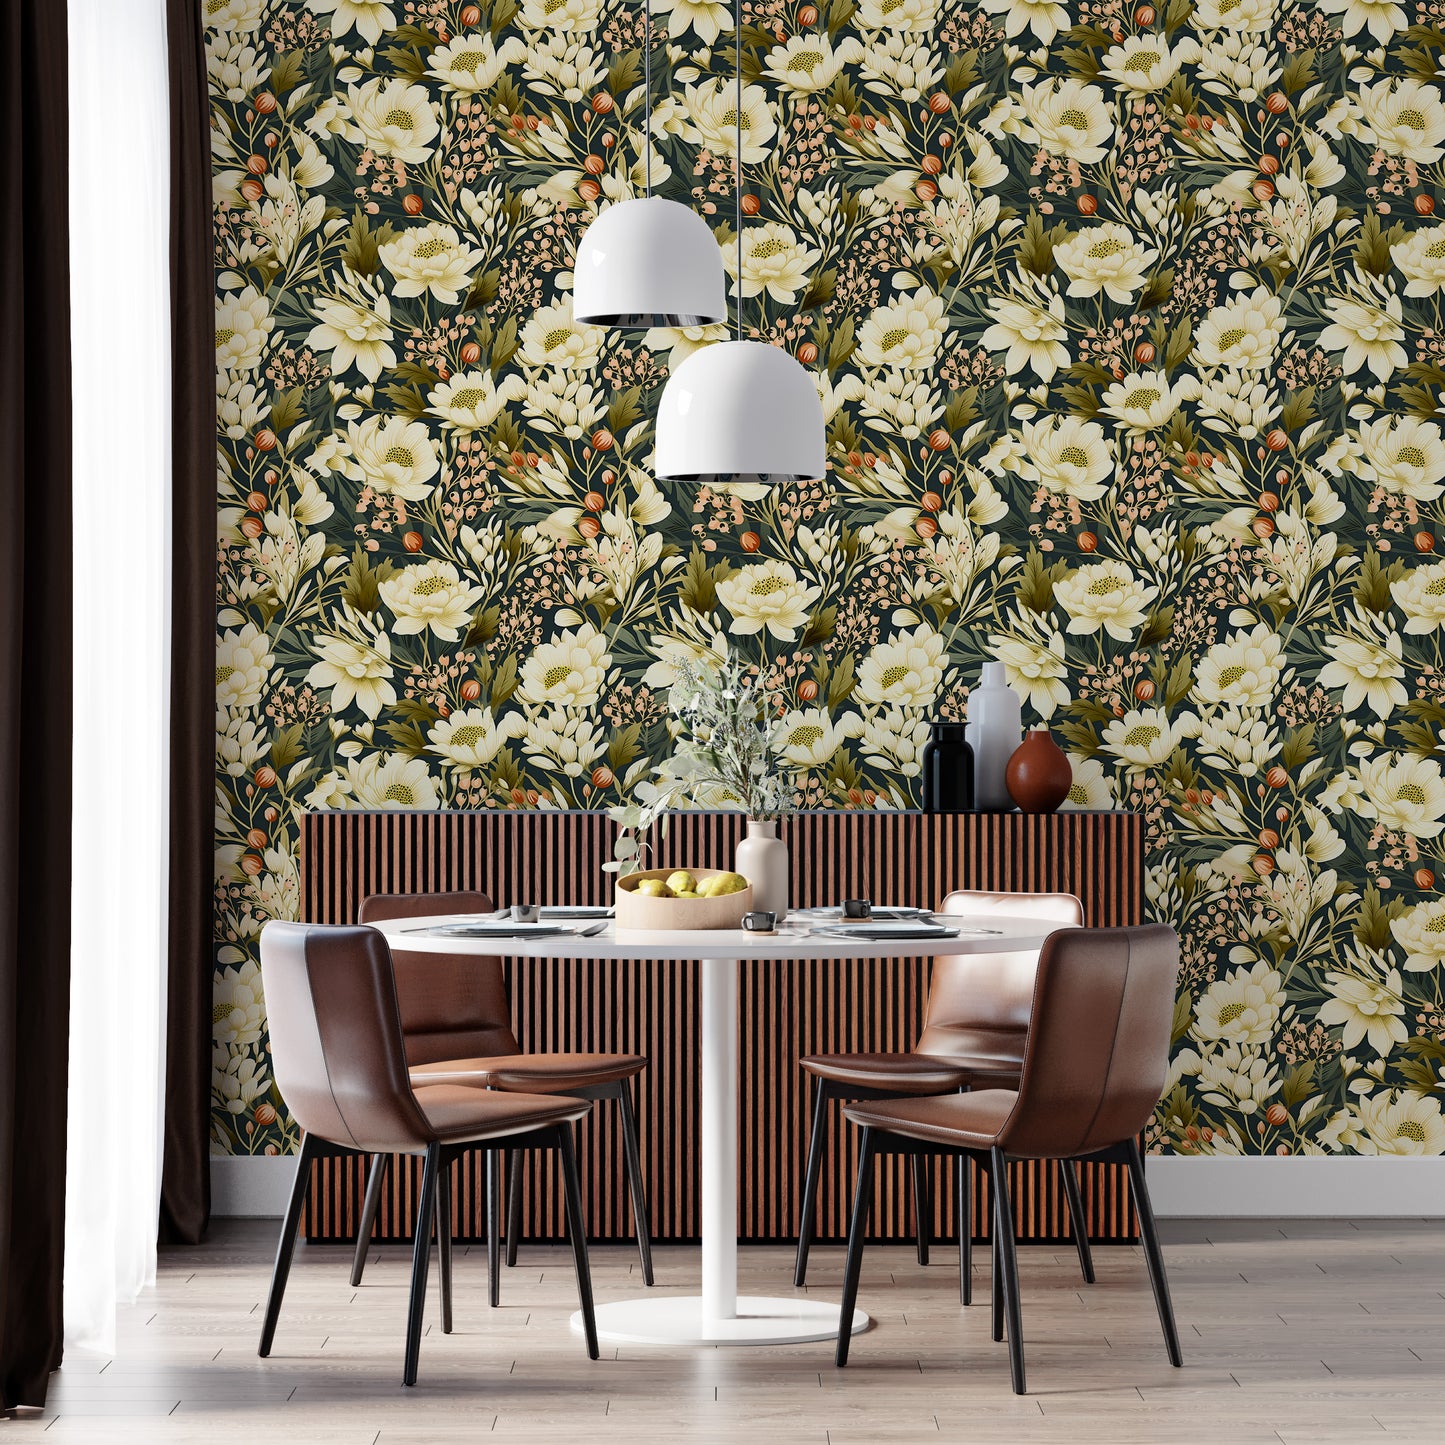 Removable Dark Floral Wall Covering